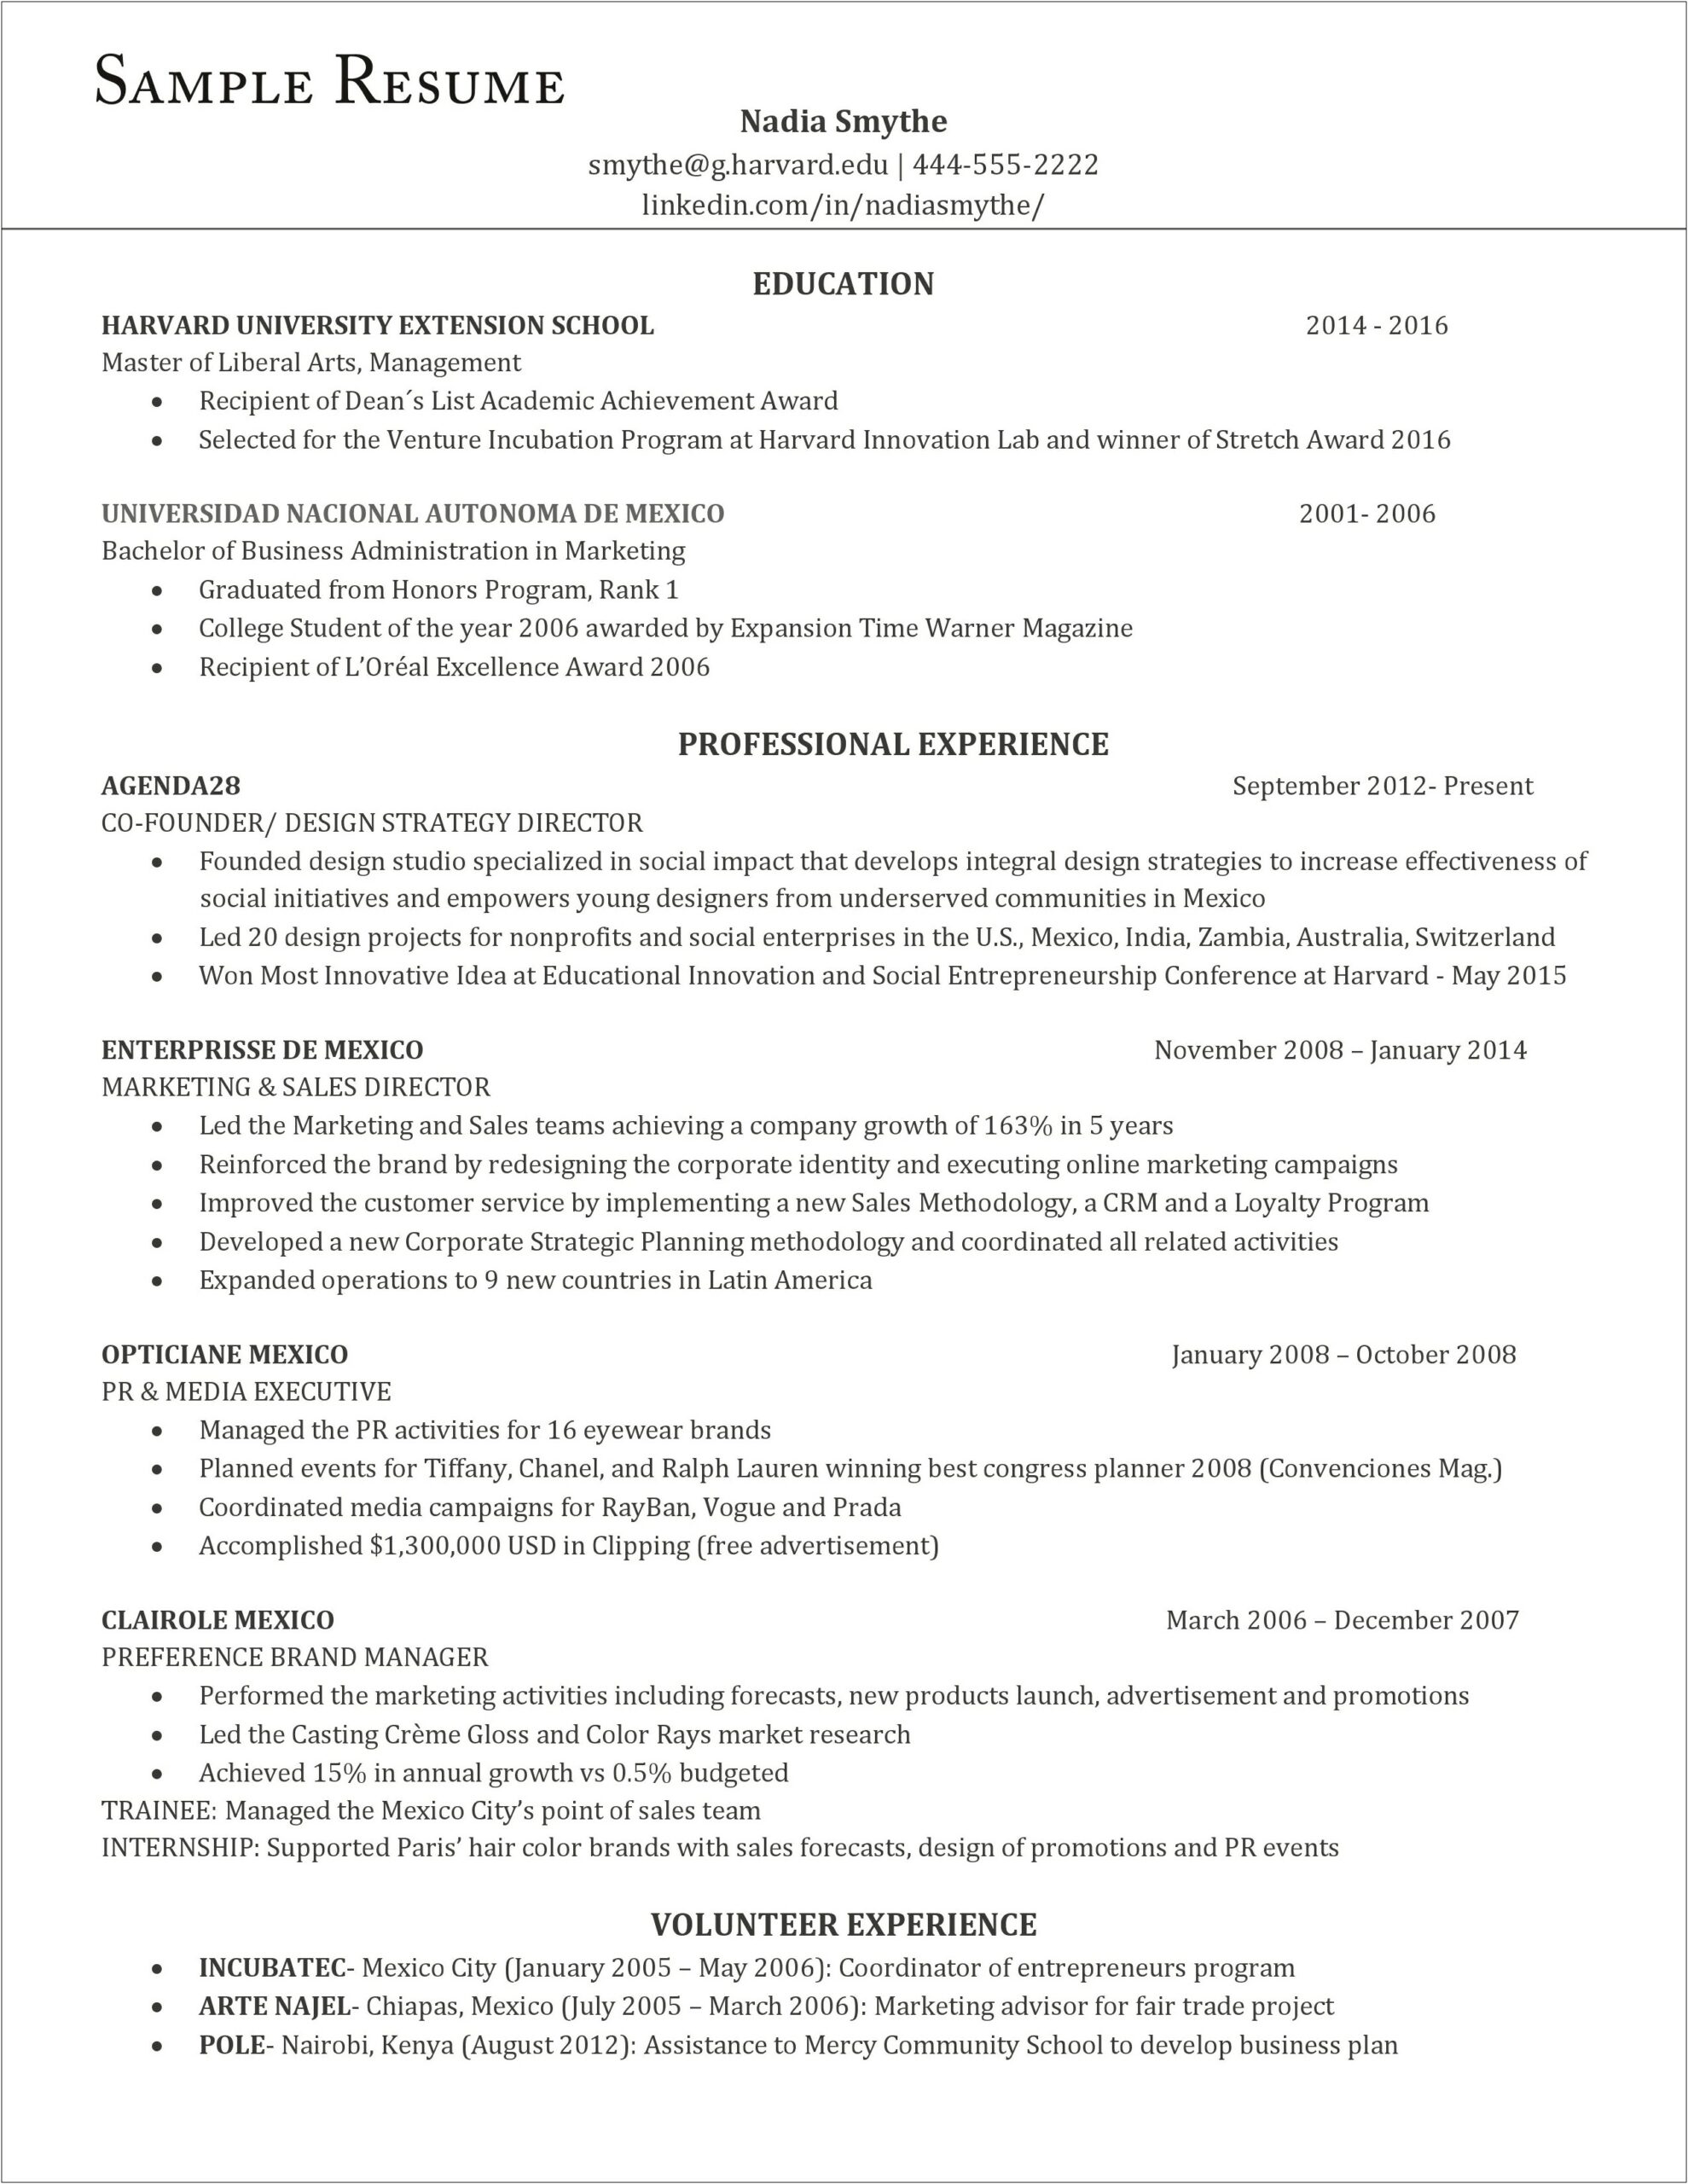 Harvard Extension School Resumes And Cover Letters